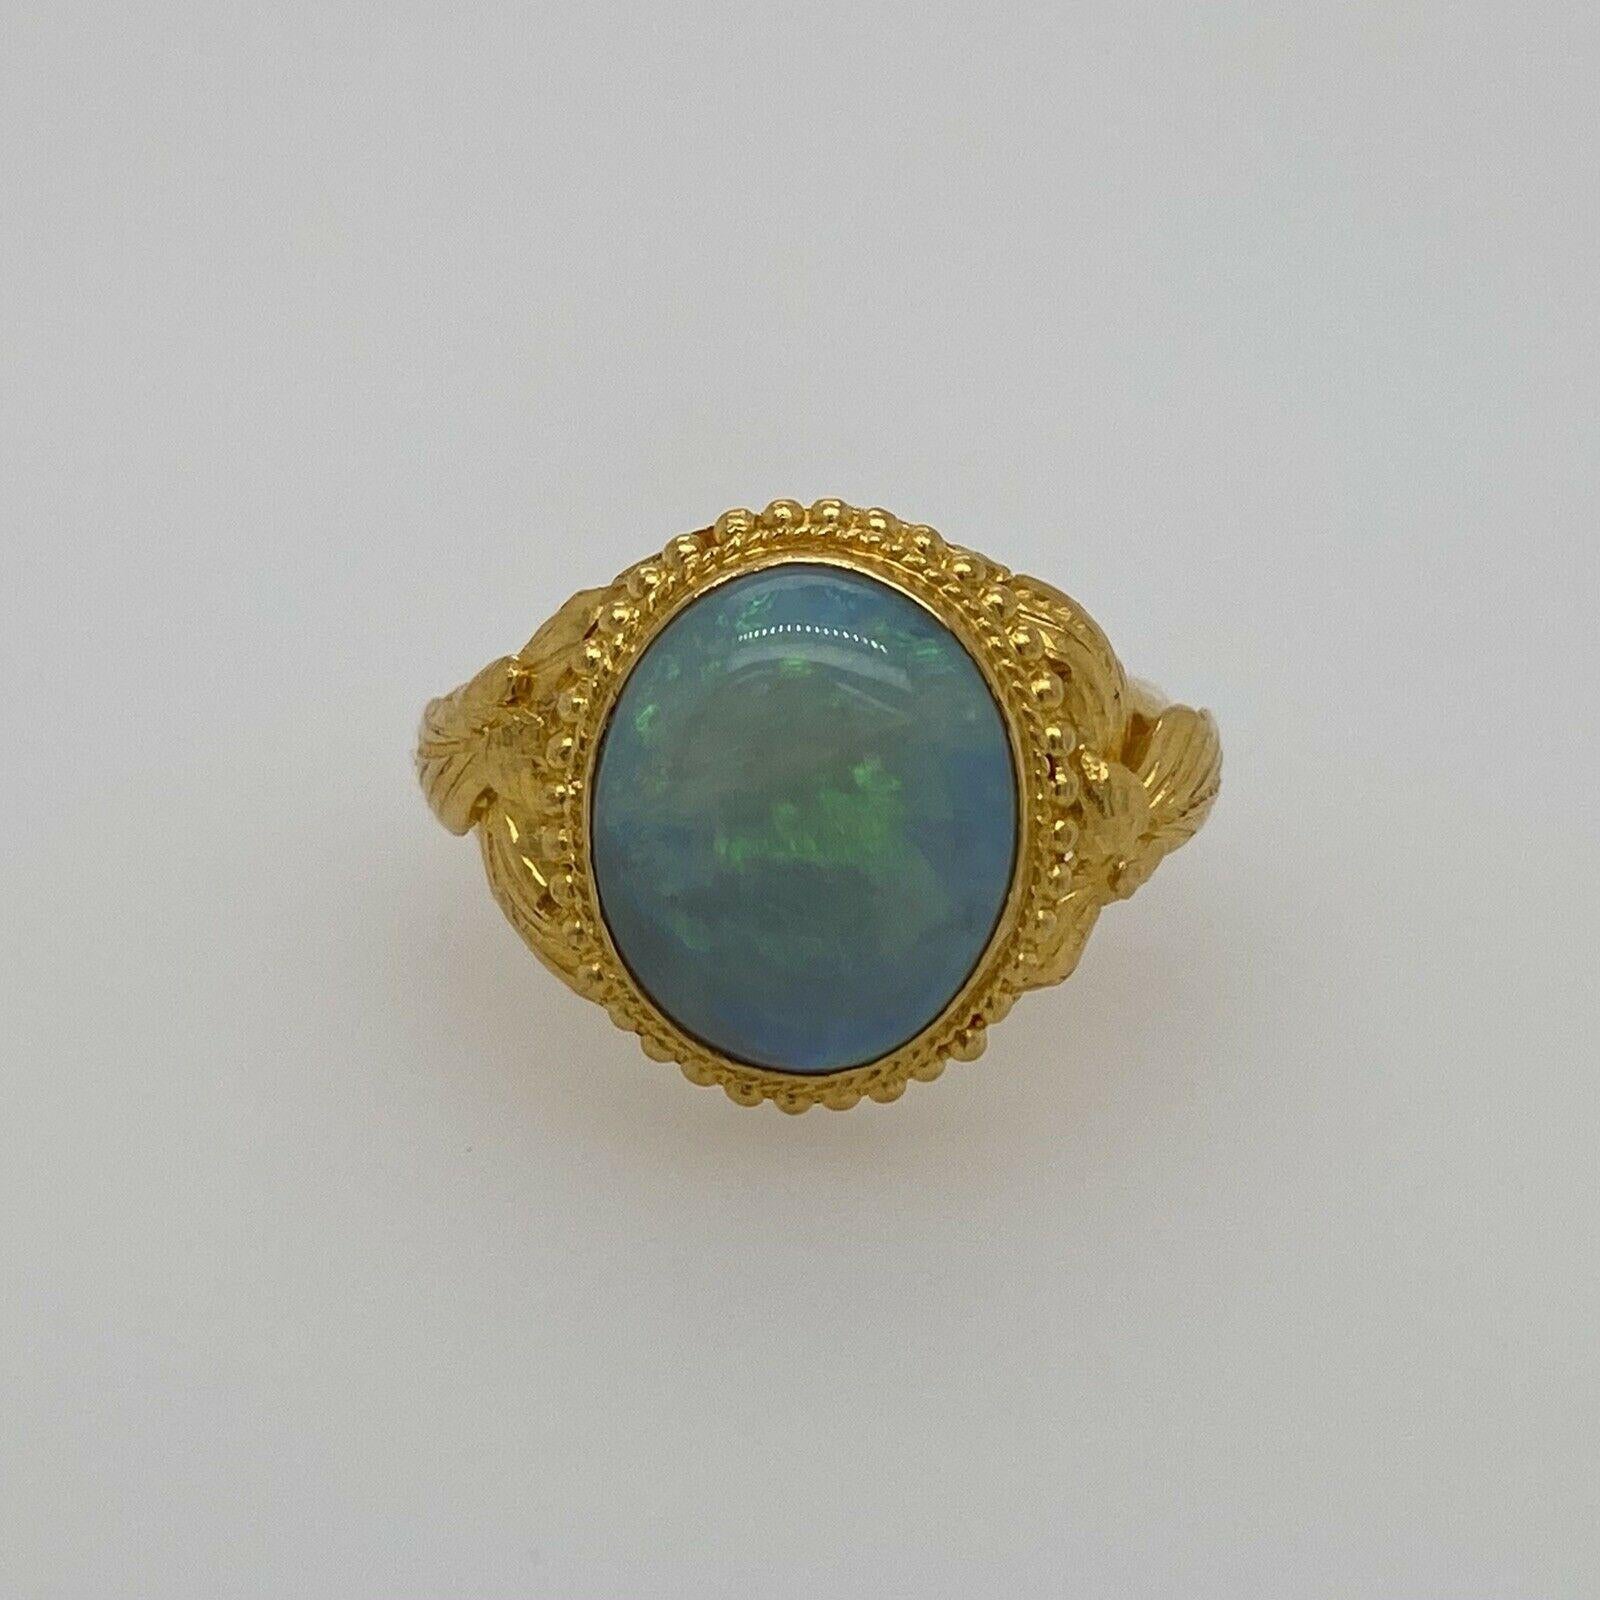 Excellent condition. This vintage ring is composed of solid 24K gold with ornate details and holds a vibrant opal. This opal measures approximately 12mm X 9.85mm. This opal is blue and green with flashes of red, orange & yellow. It is a size 5.5 and